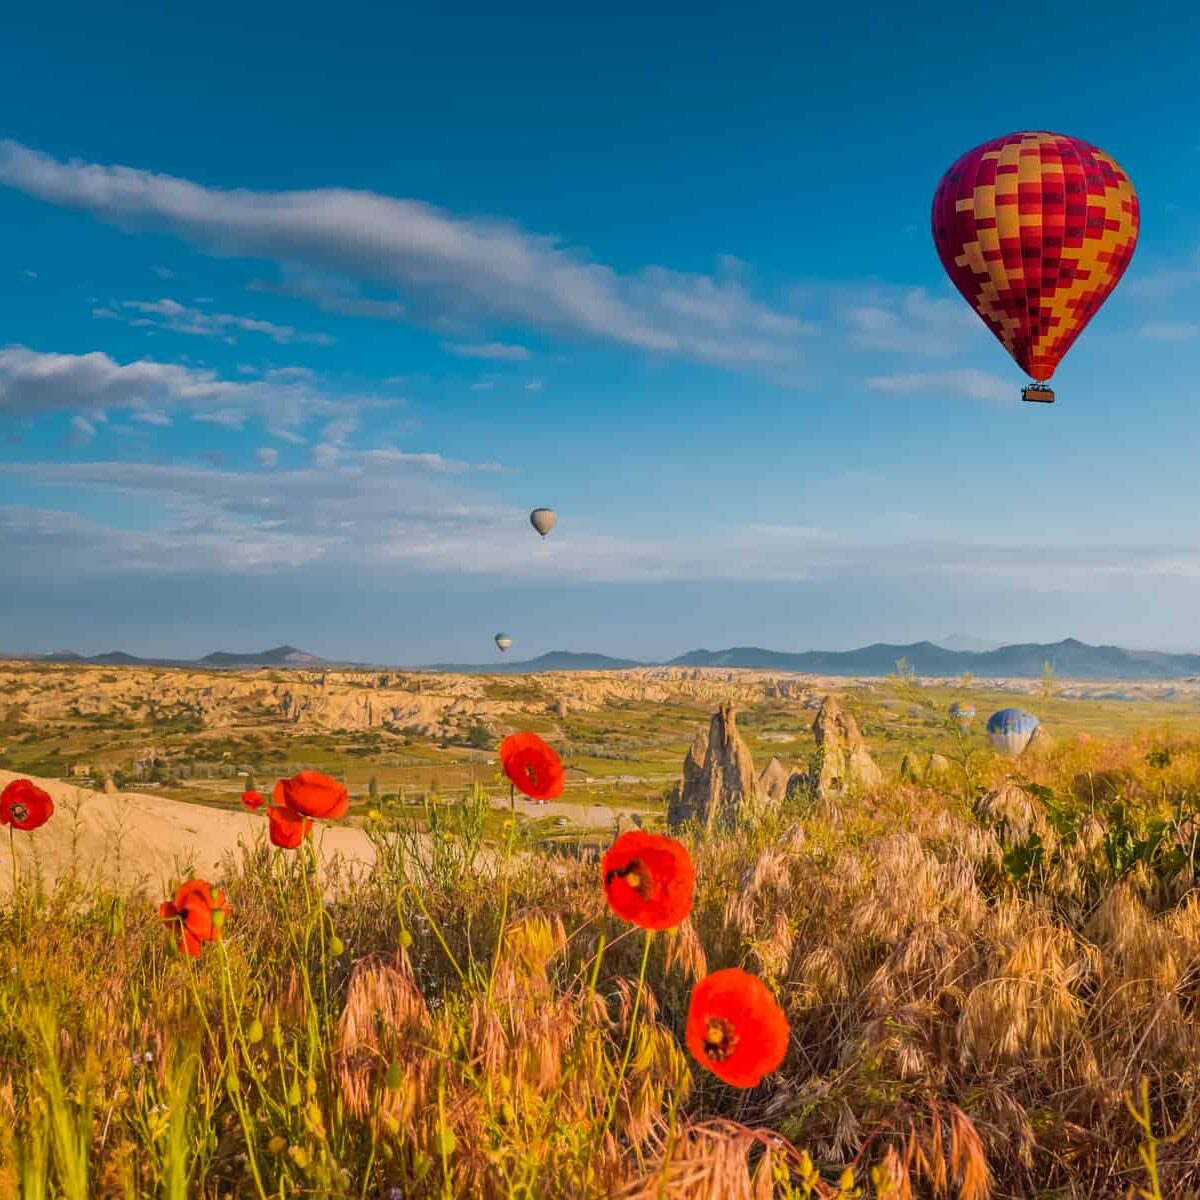 Hot air balloons flying over a field of poppies in an American Express Travel destination.